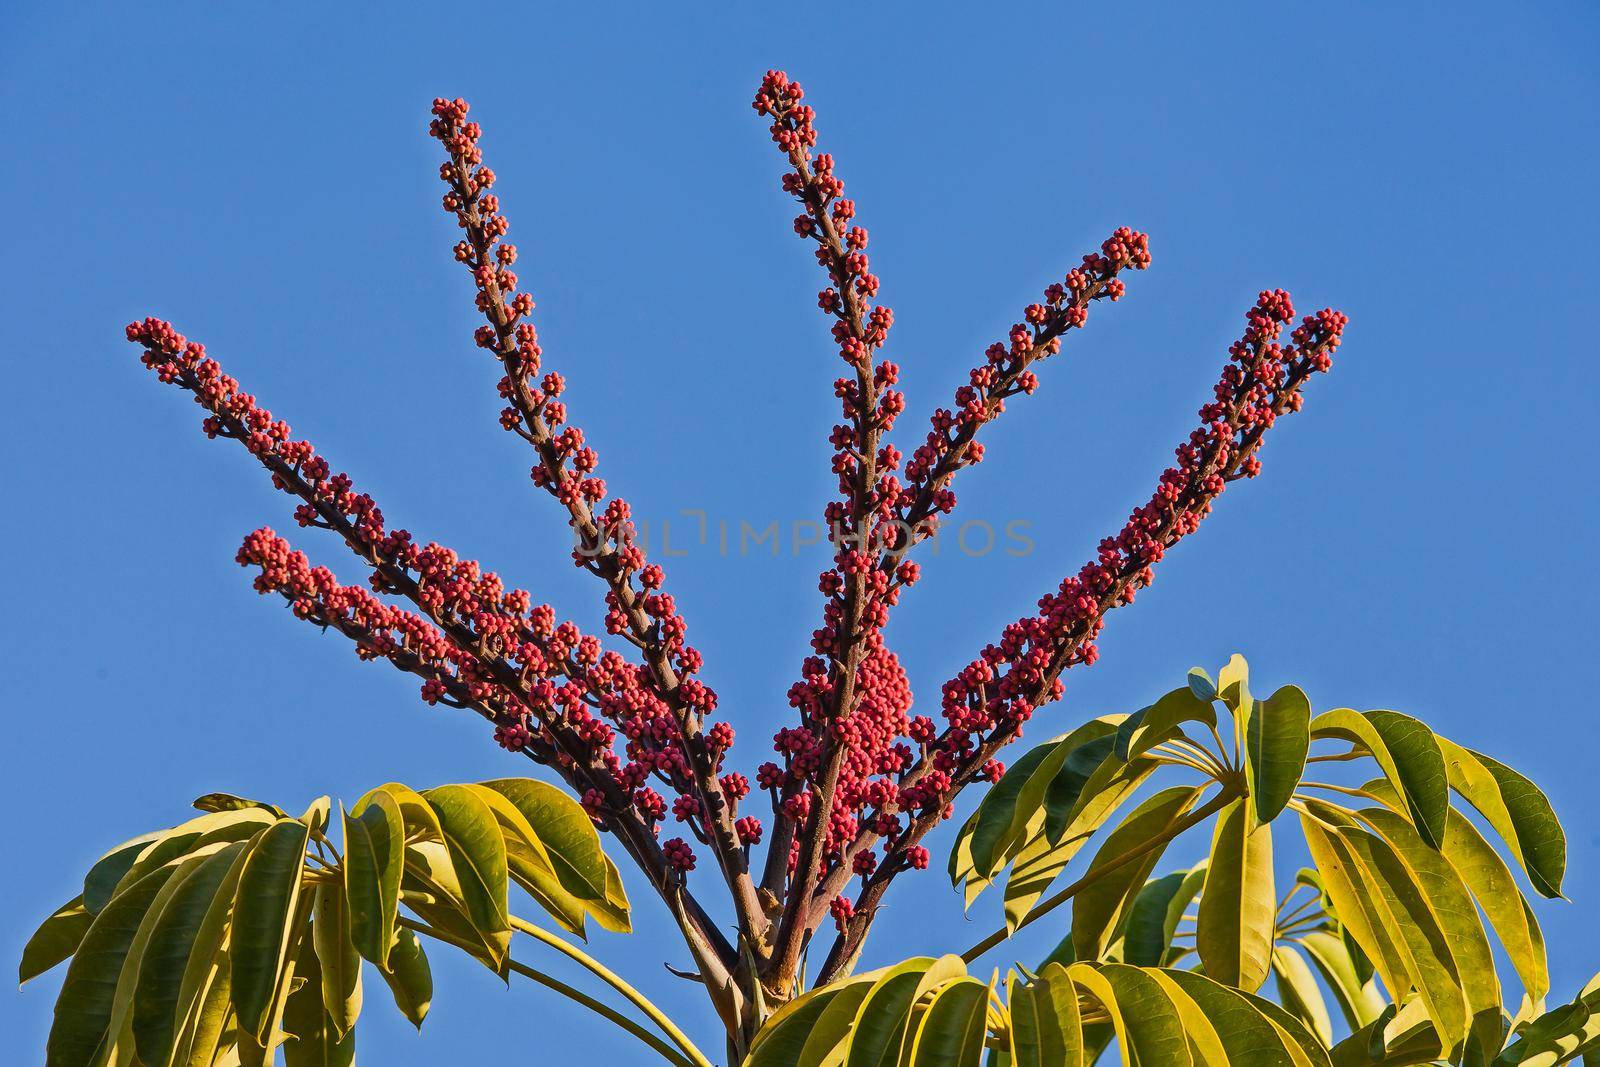 Red seeds, green leaves and blue sky 13244 by kobus_peche